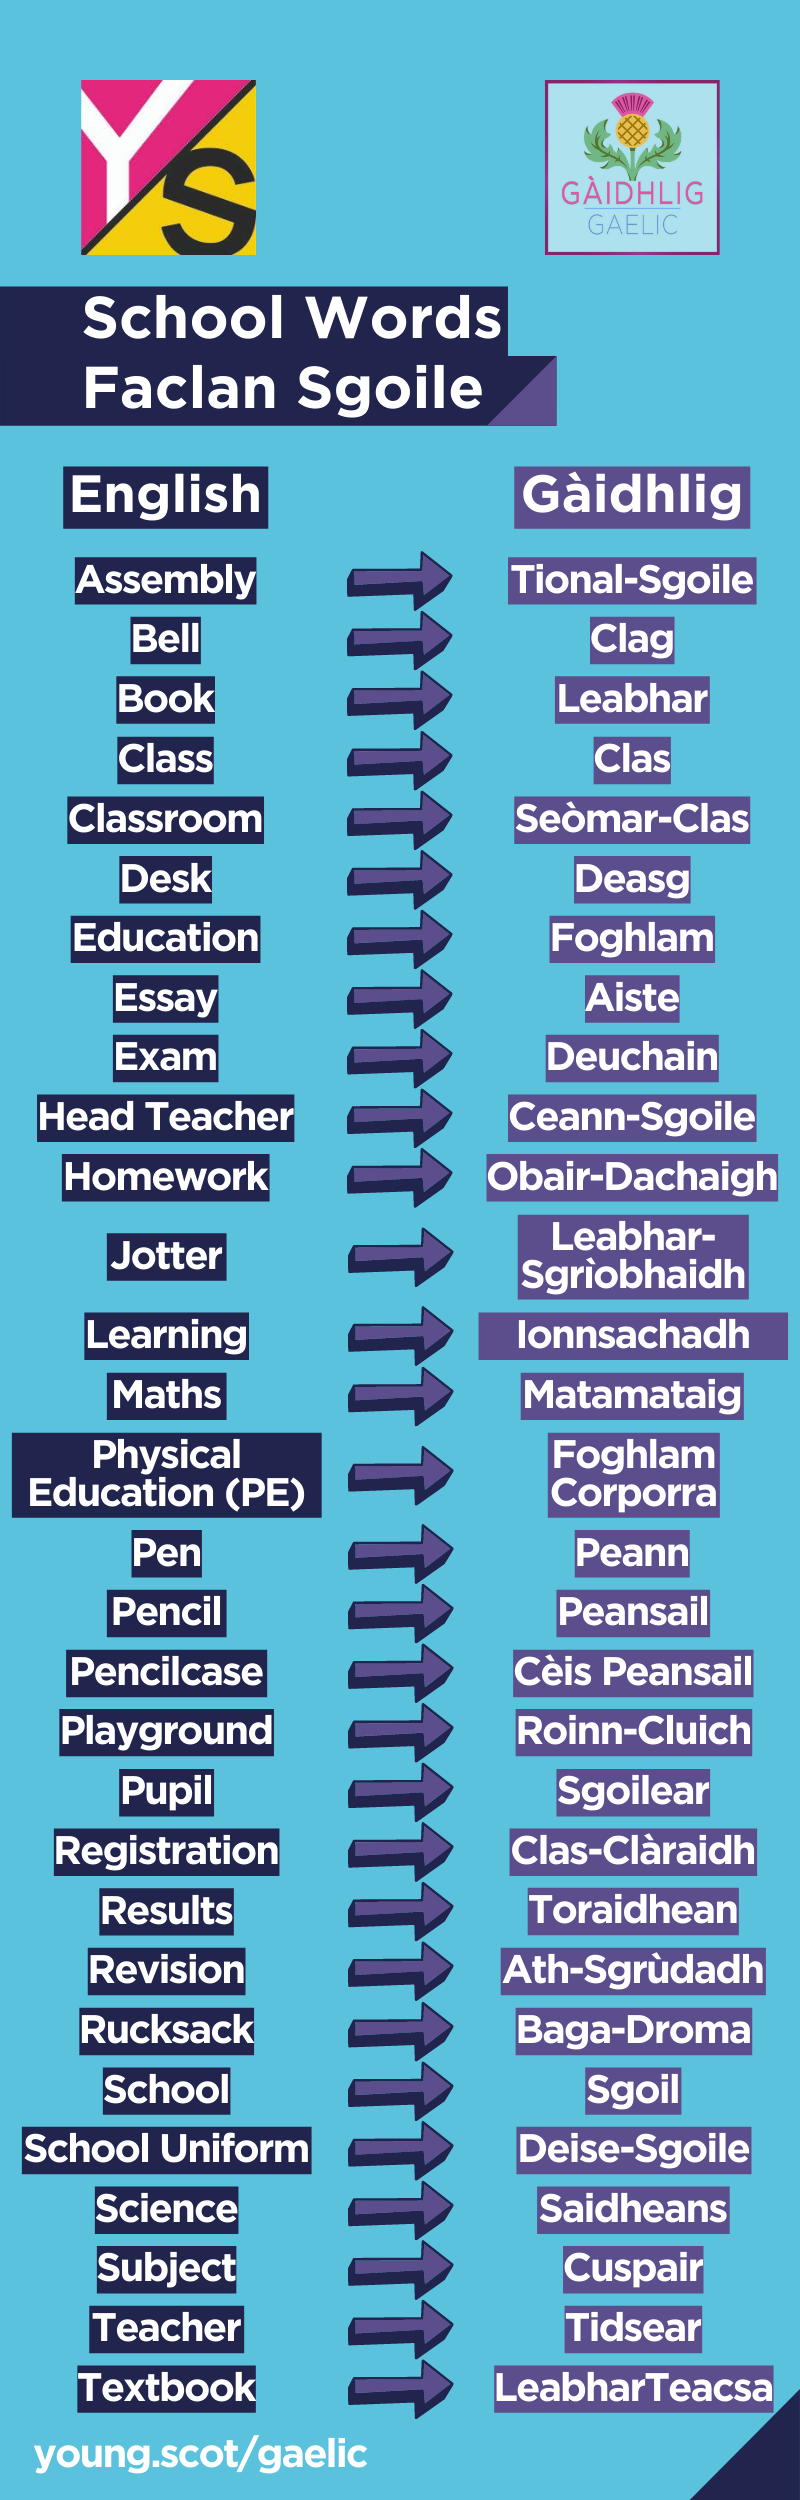 A list of 30 words relating to school on the left with their Gaelic translations on the right - text version below.